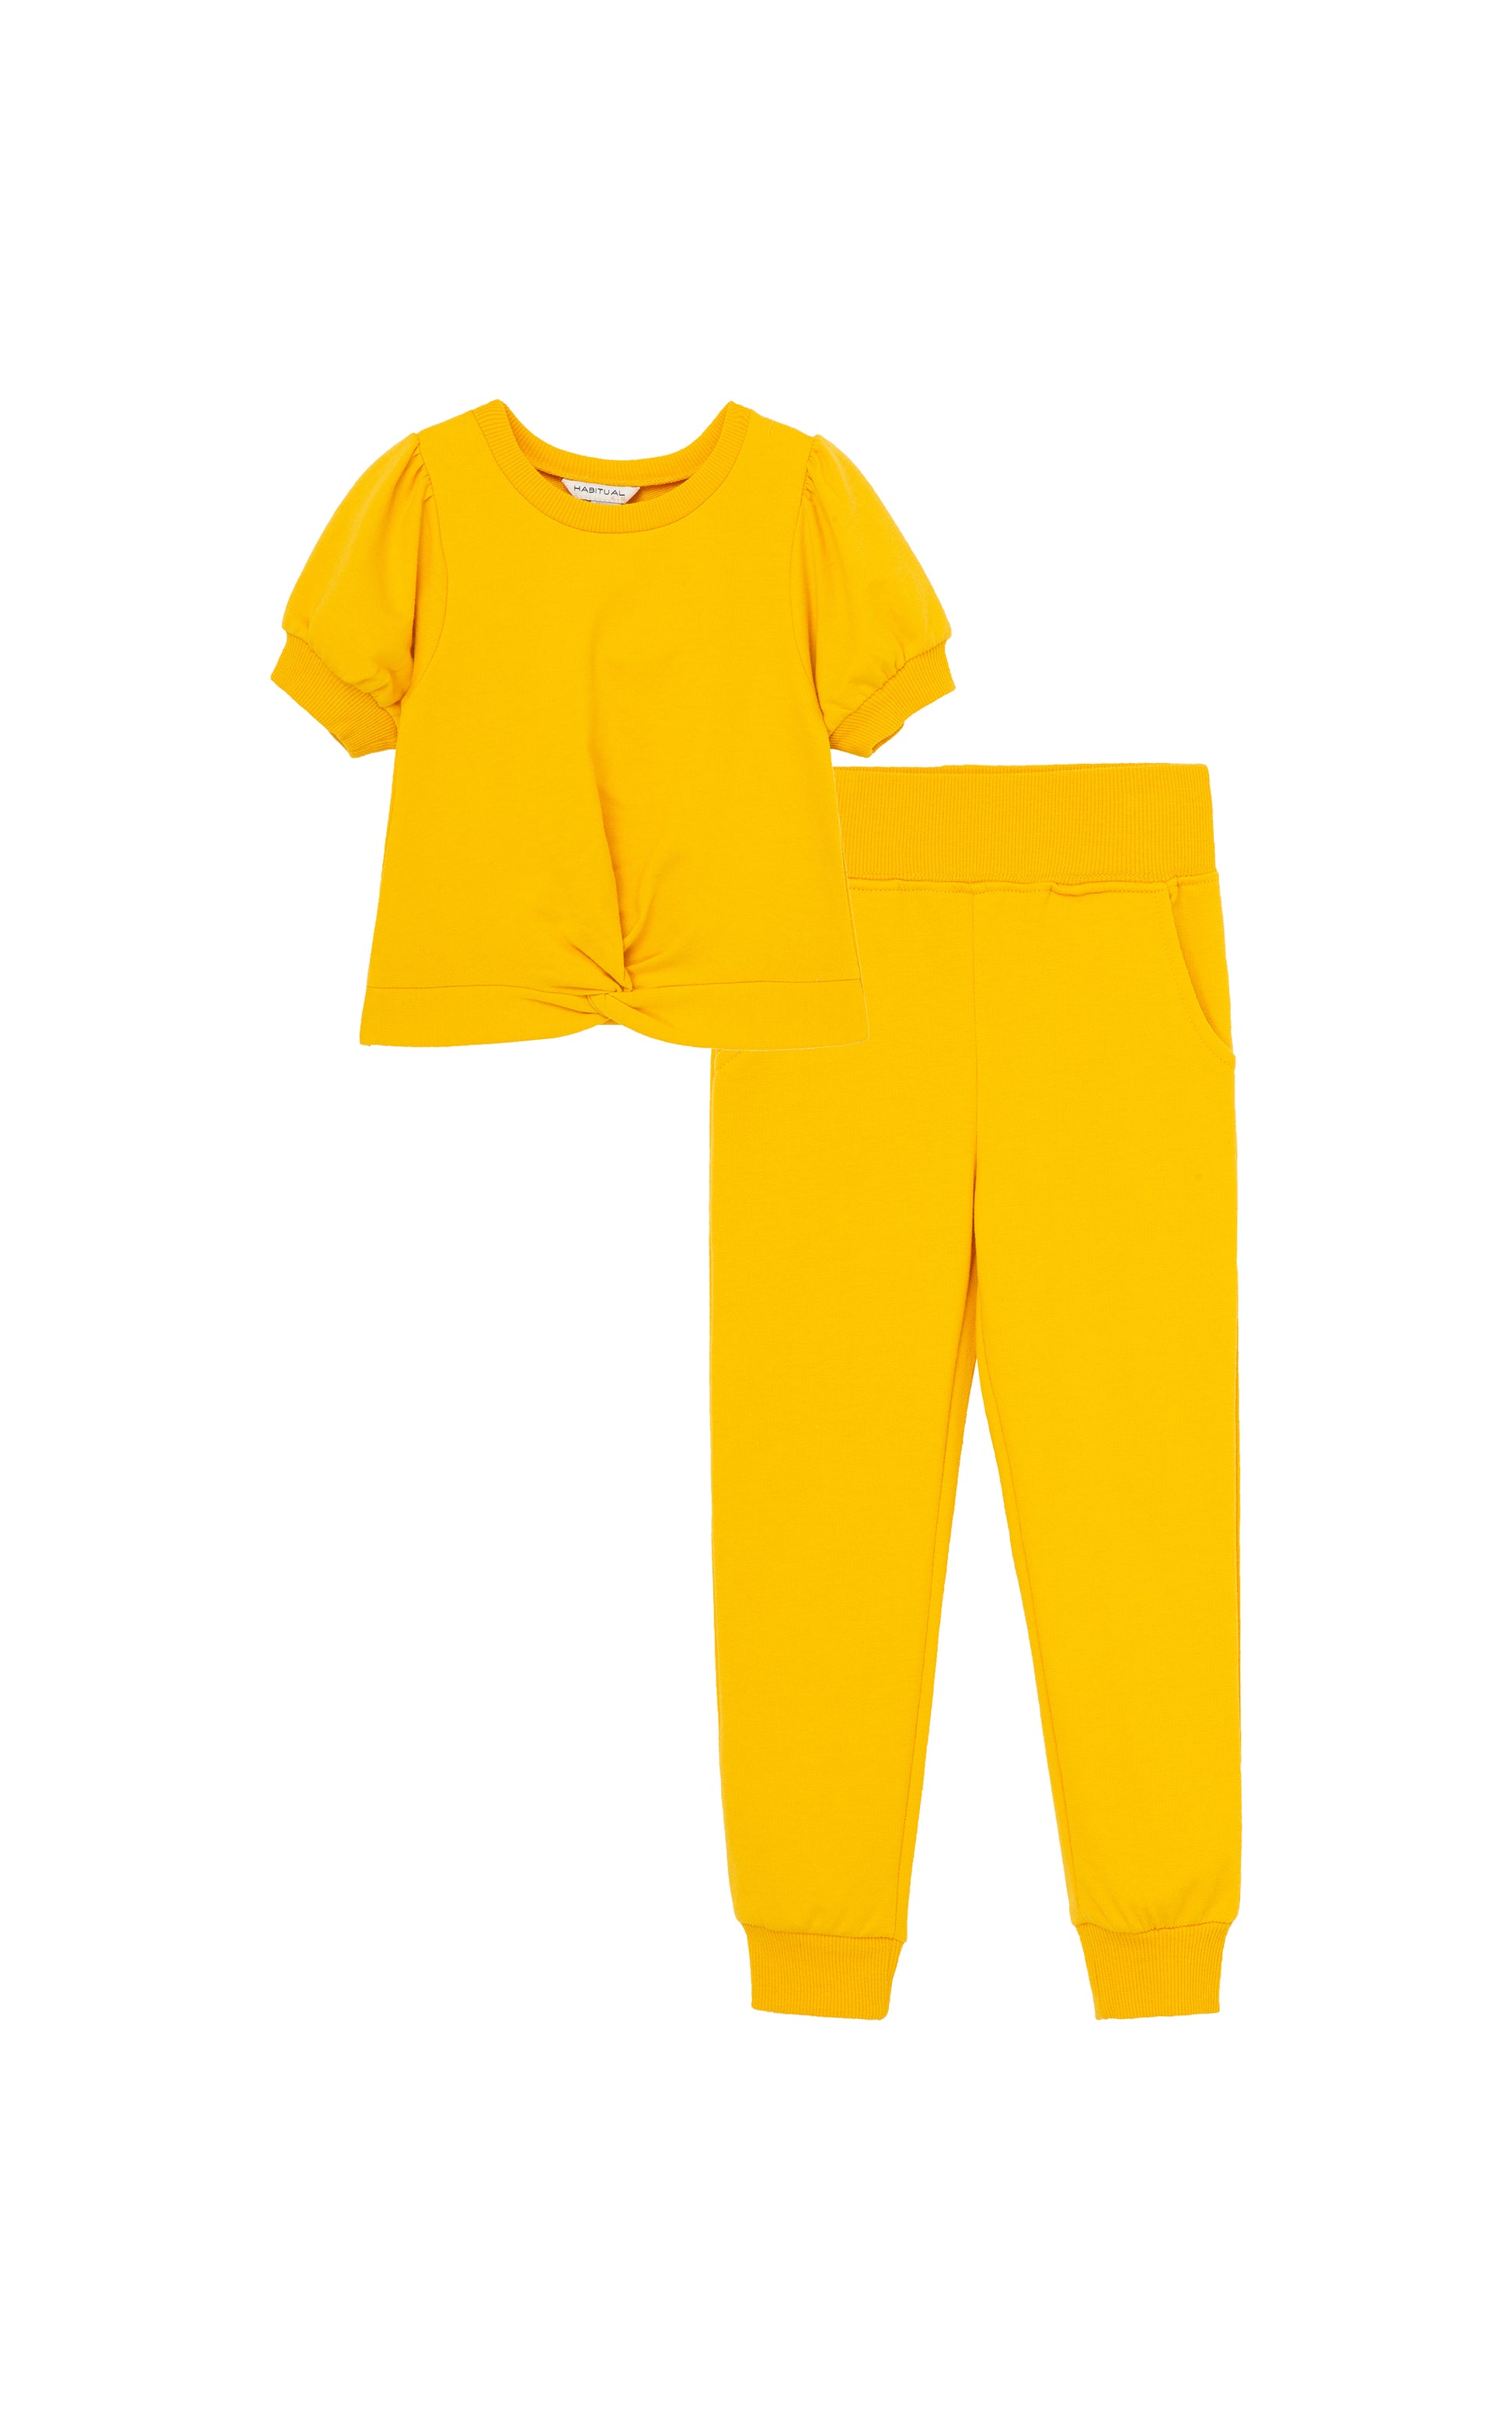 Bright yellow short sleeve sweatshirt knotted at waist with matching sweatpants